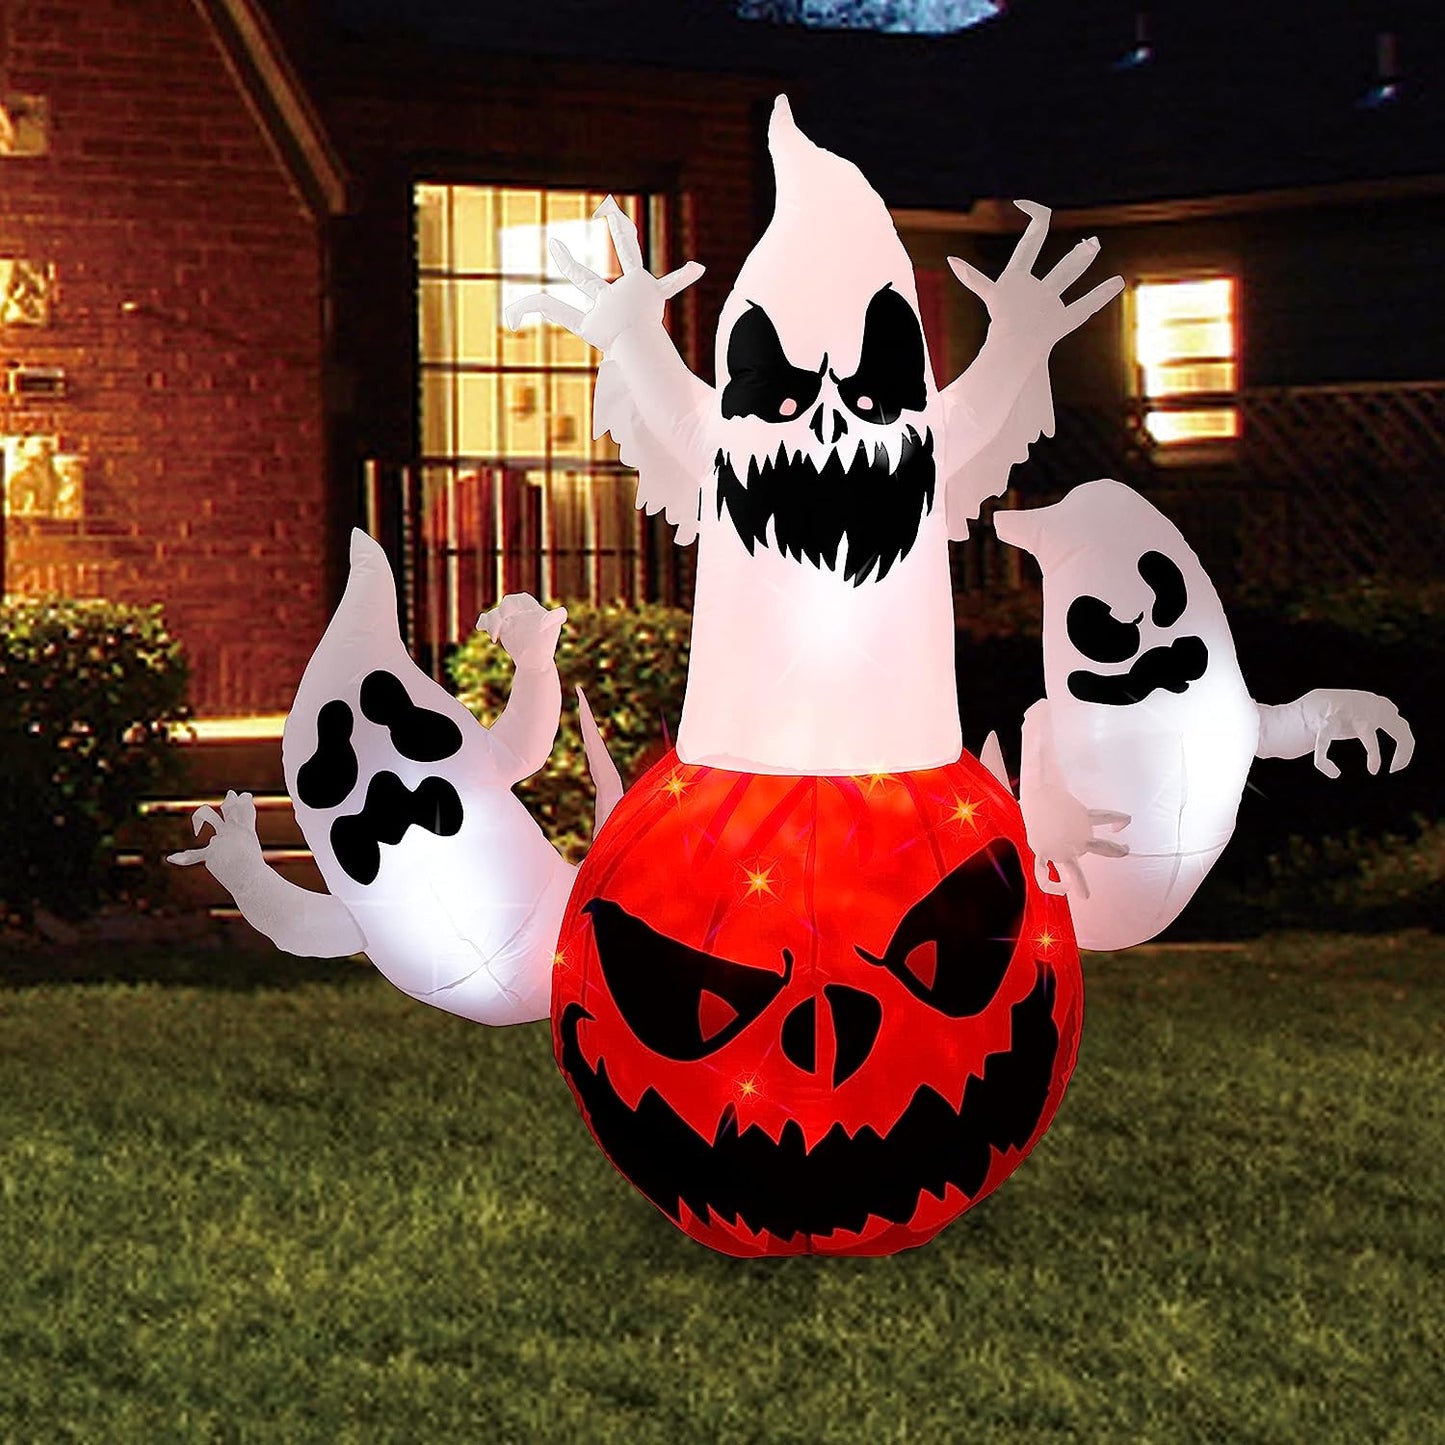 6FT Tall Halloween Inflatable Pumpkin with 3 Ghosts